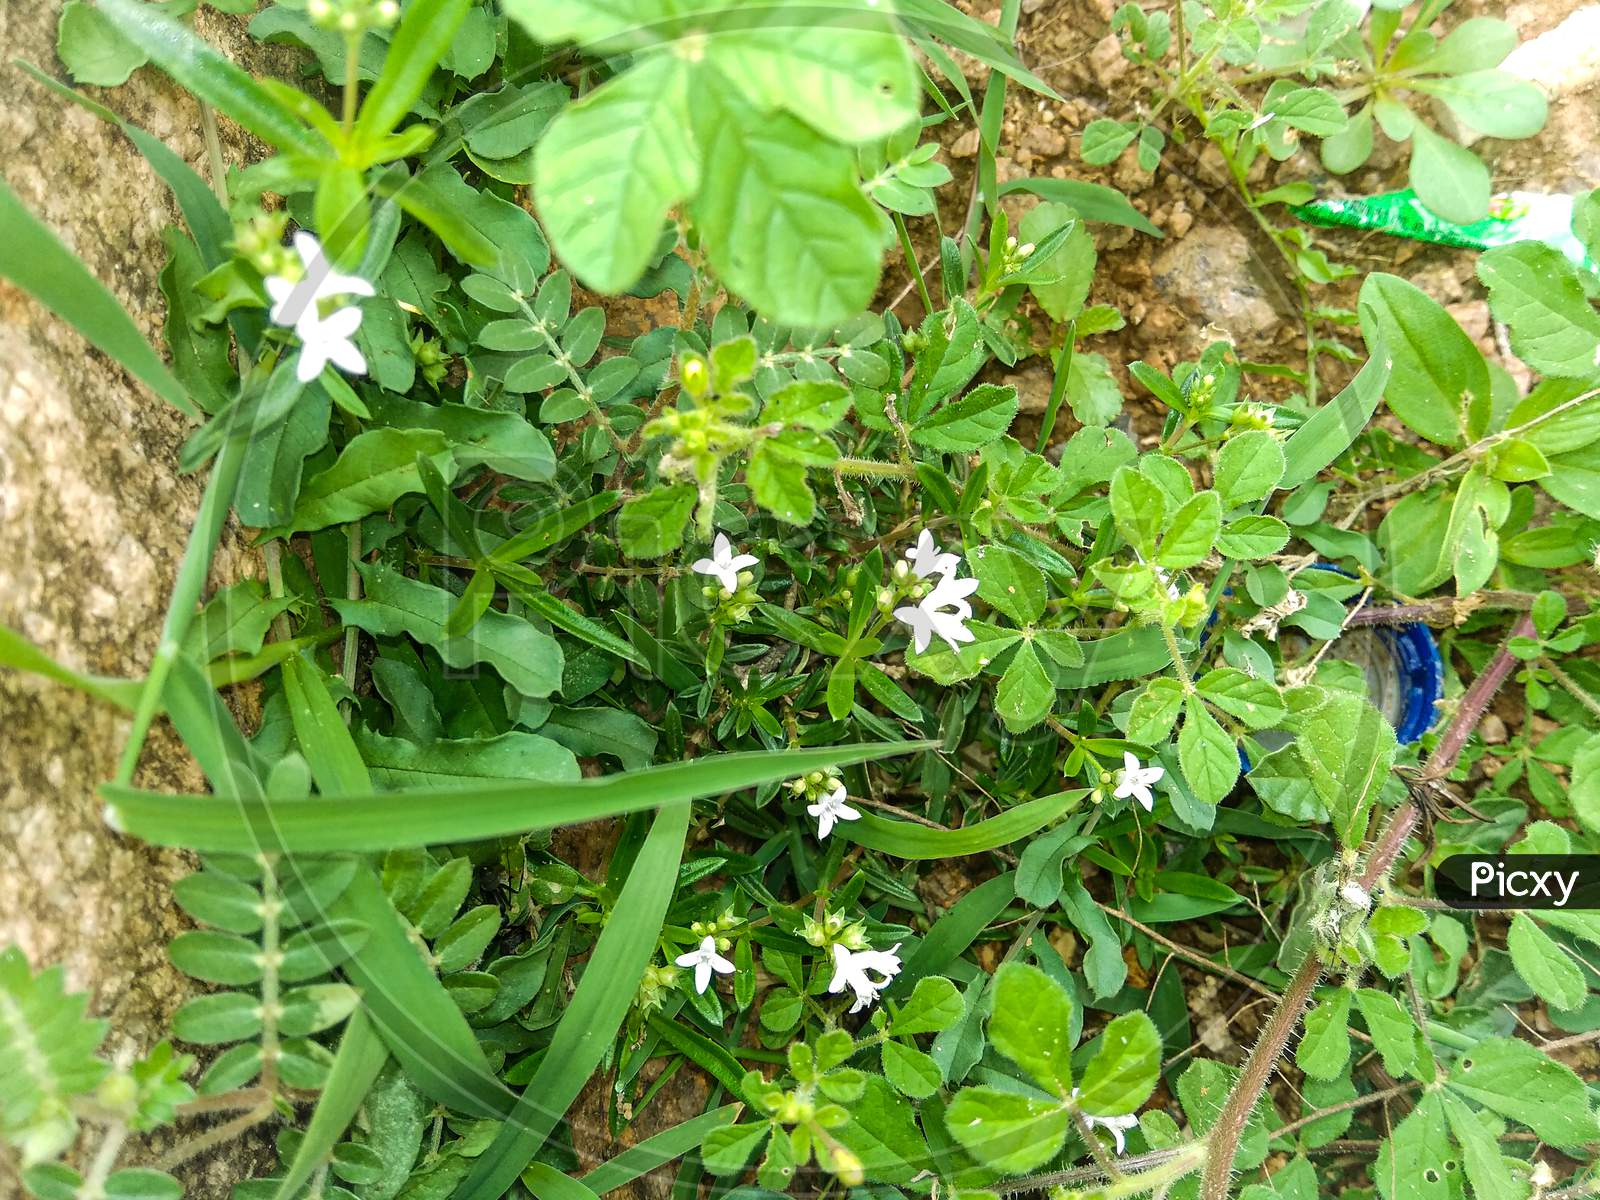 The small flowers and plants